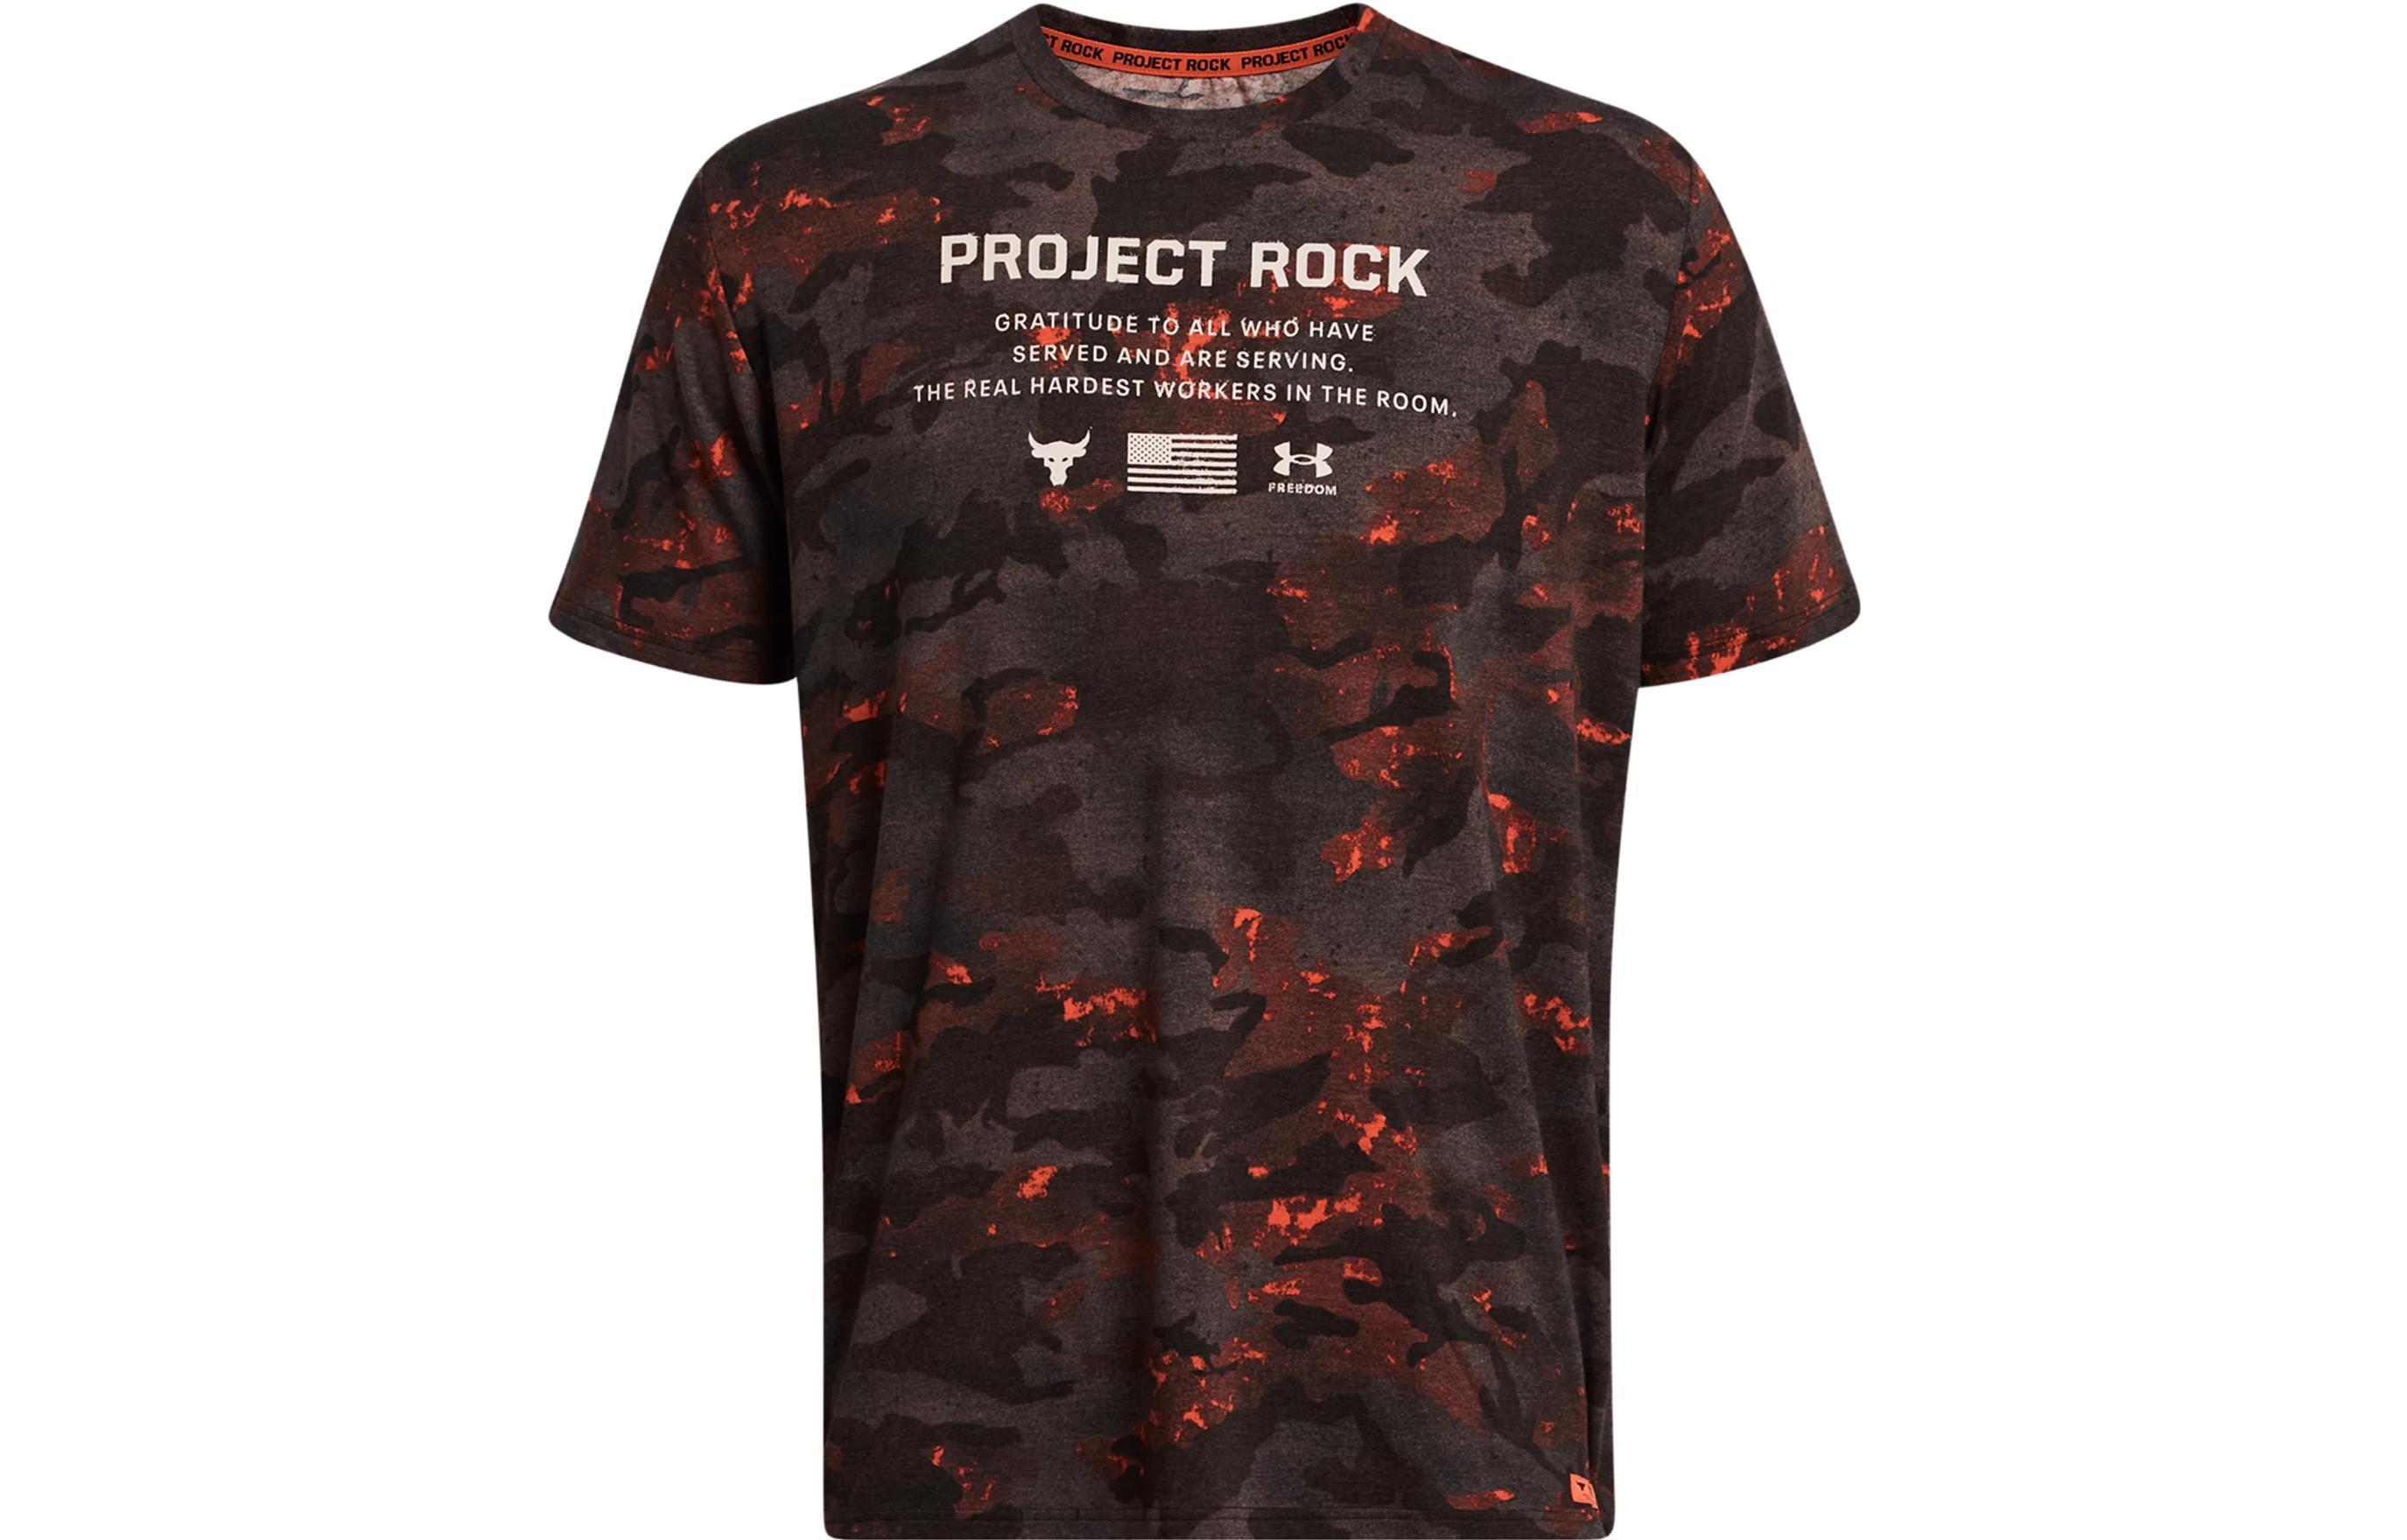 Under Armour Project Rock Veterans Day T